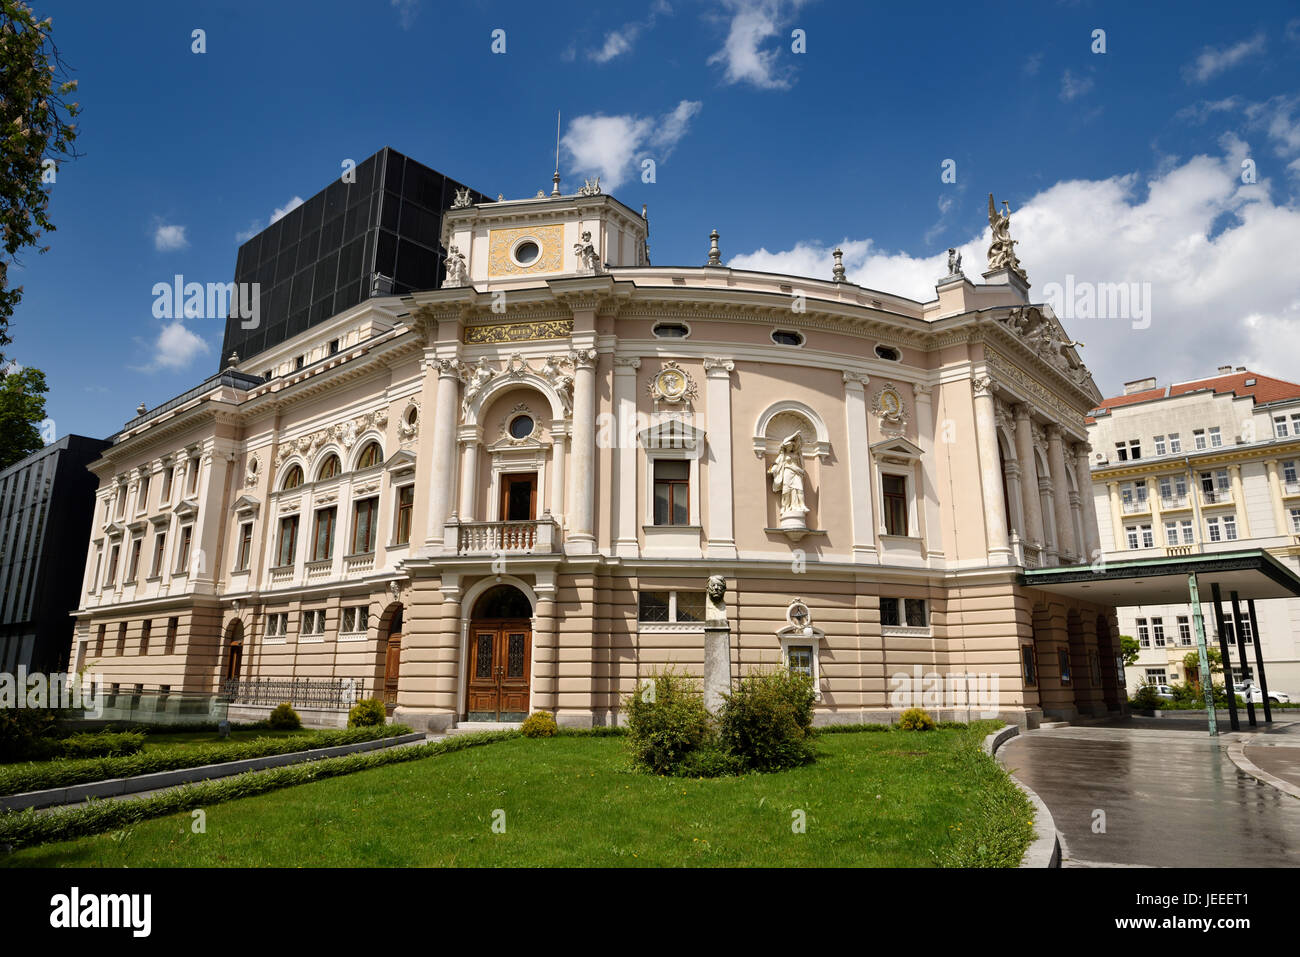 Neo Renaissance architecture of the Slovenian National Opera and Ballet Theatre of Ljubljana Slovenia in sun after a rain storm Stock Photo